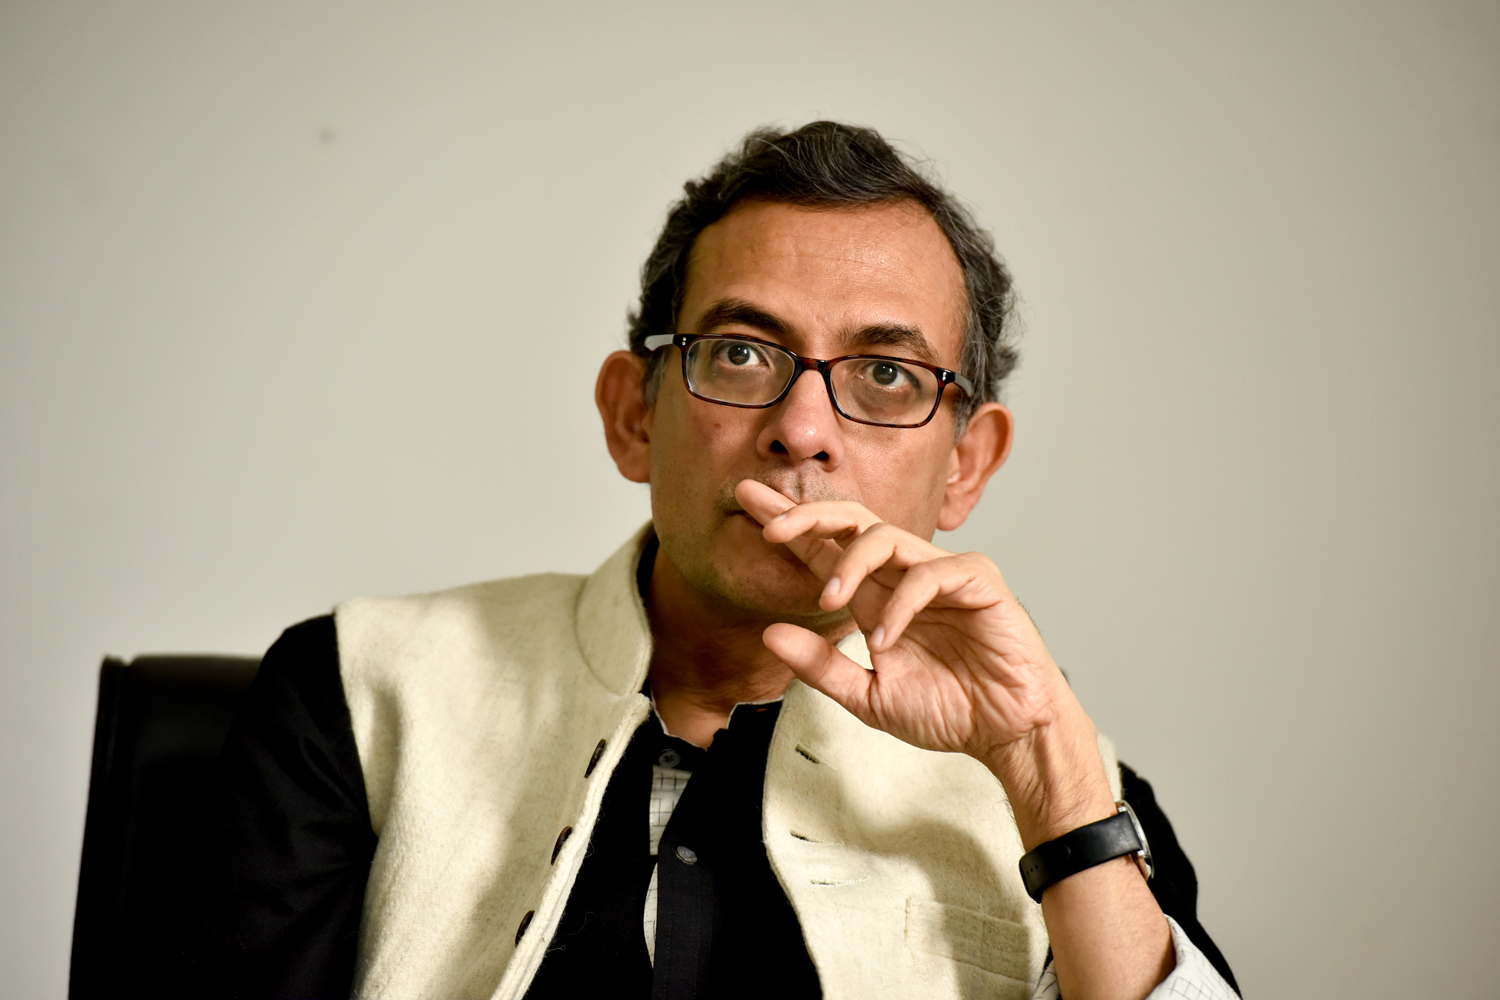 We make space for so many vanity projects, UBI is not impossible to implement: Economist Abhijit Banerjee